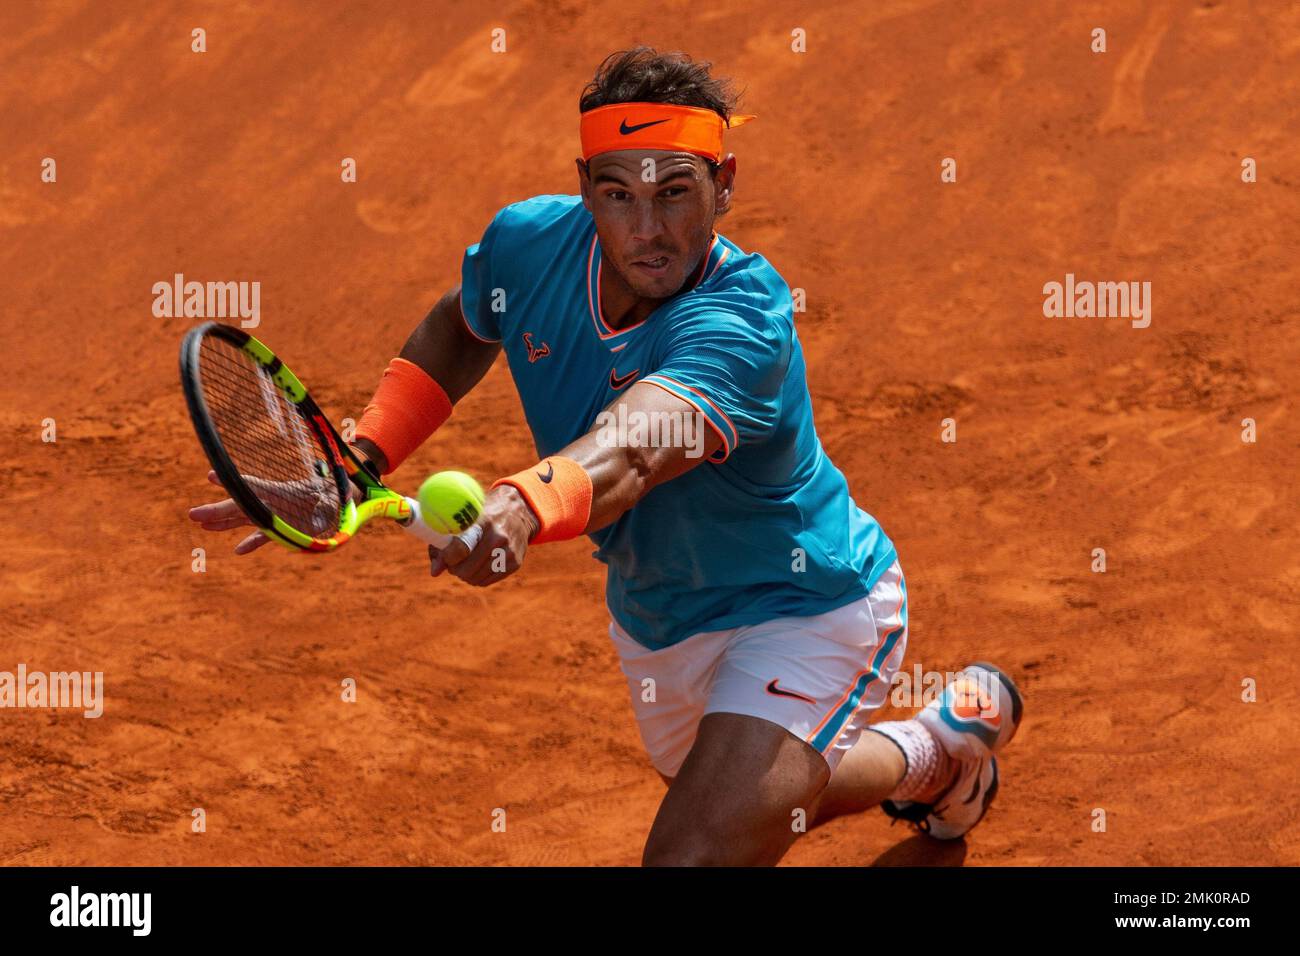 Rafael Nadal, from Spain, returns the ball to Felix Auger-Aliassime, from Canada, during the Madrid Open tennis tournament in Madrid, Wednesday, May 8, 2019